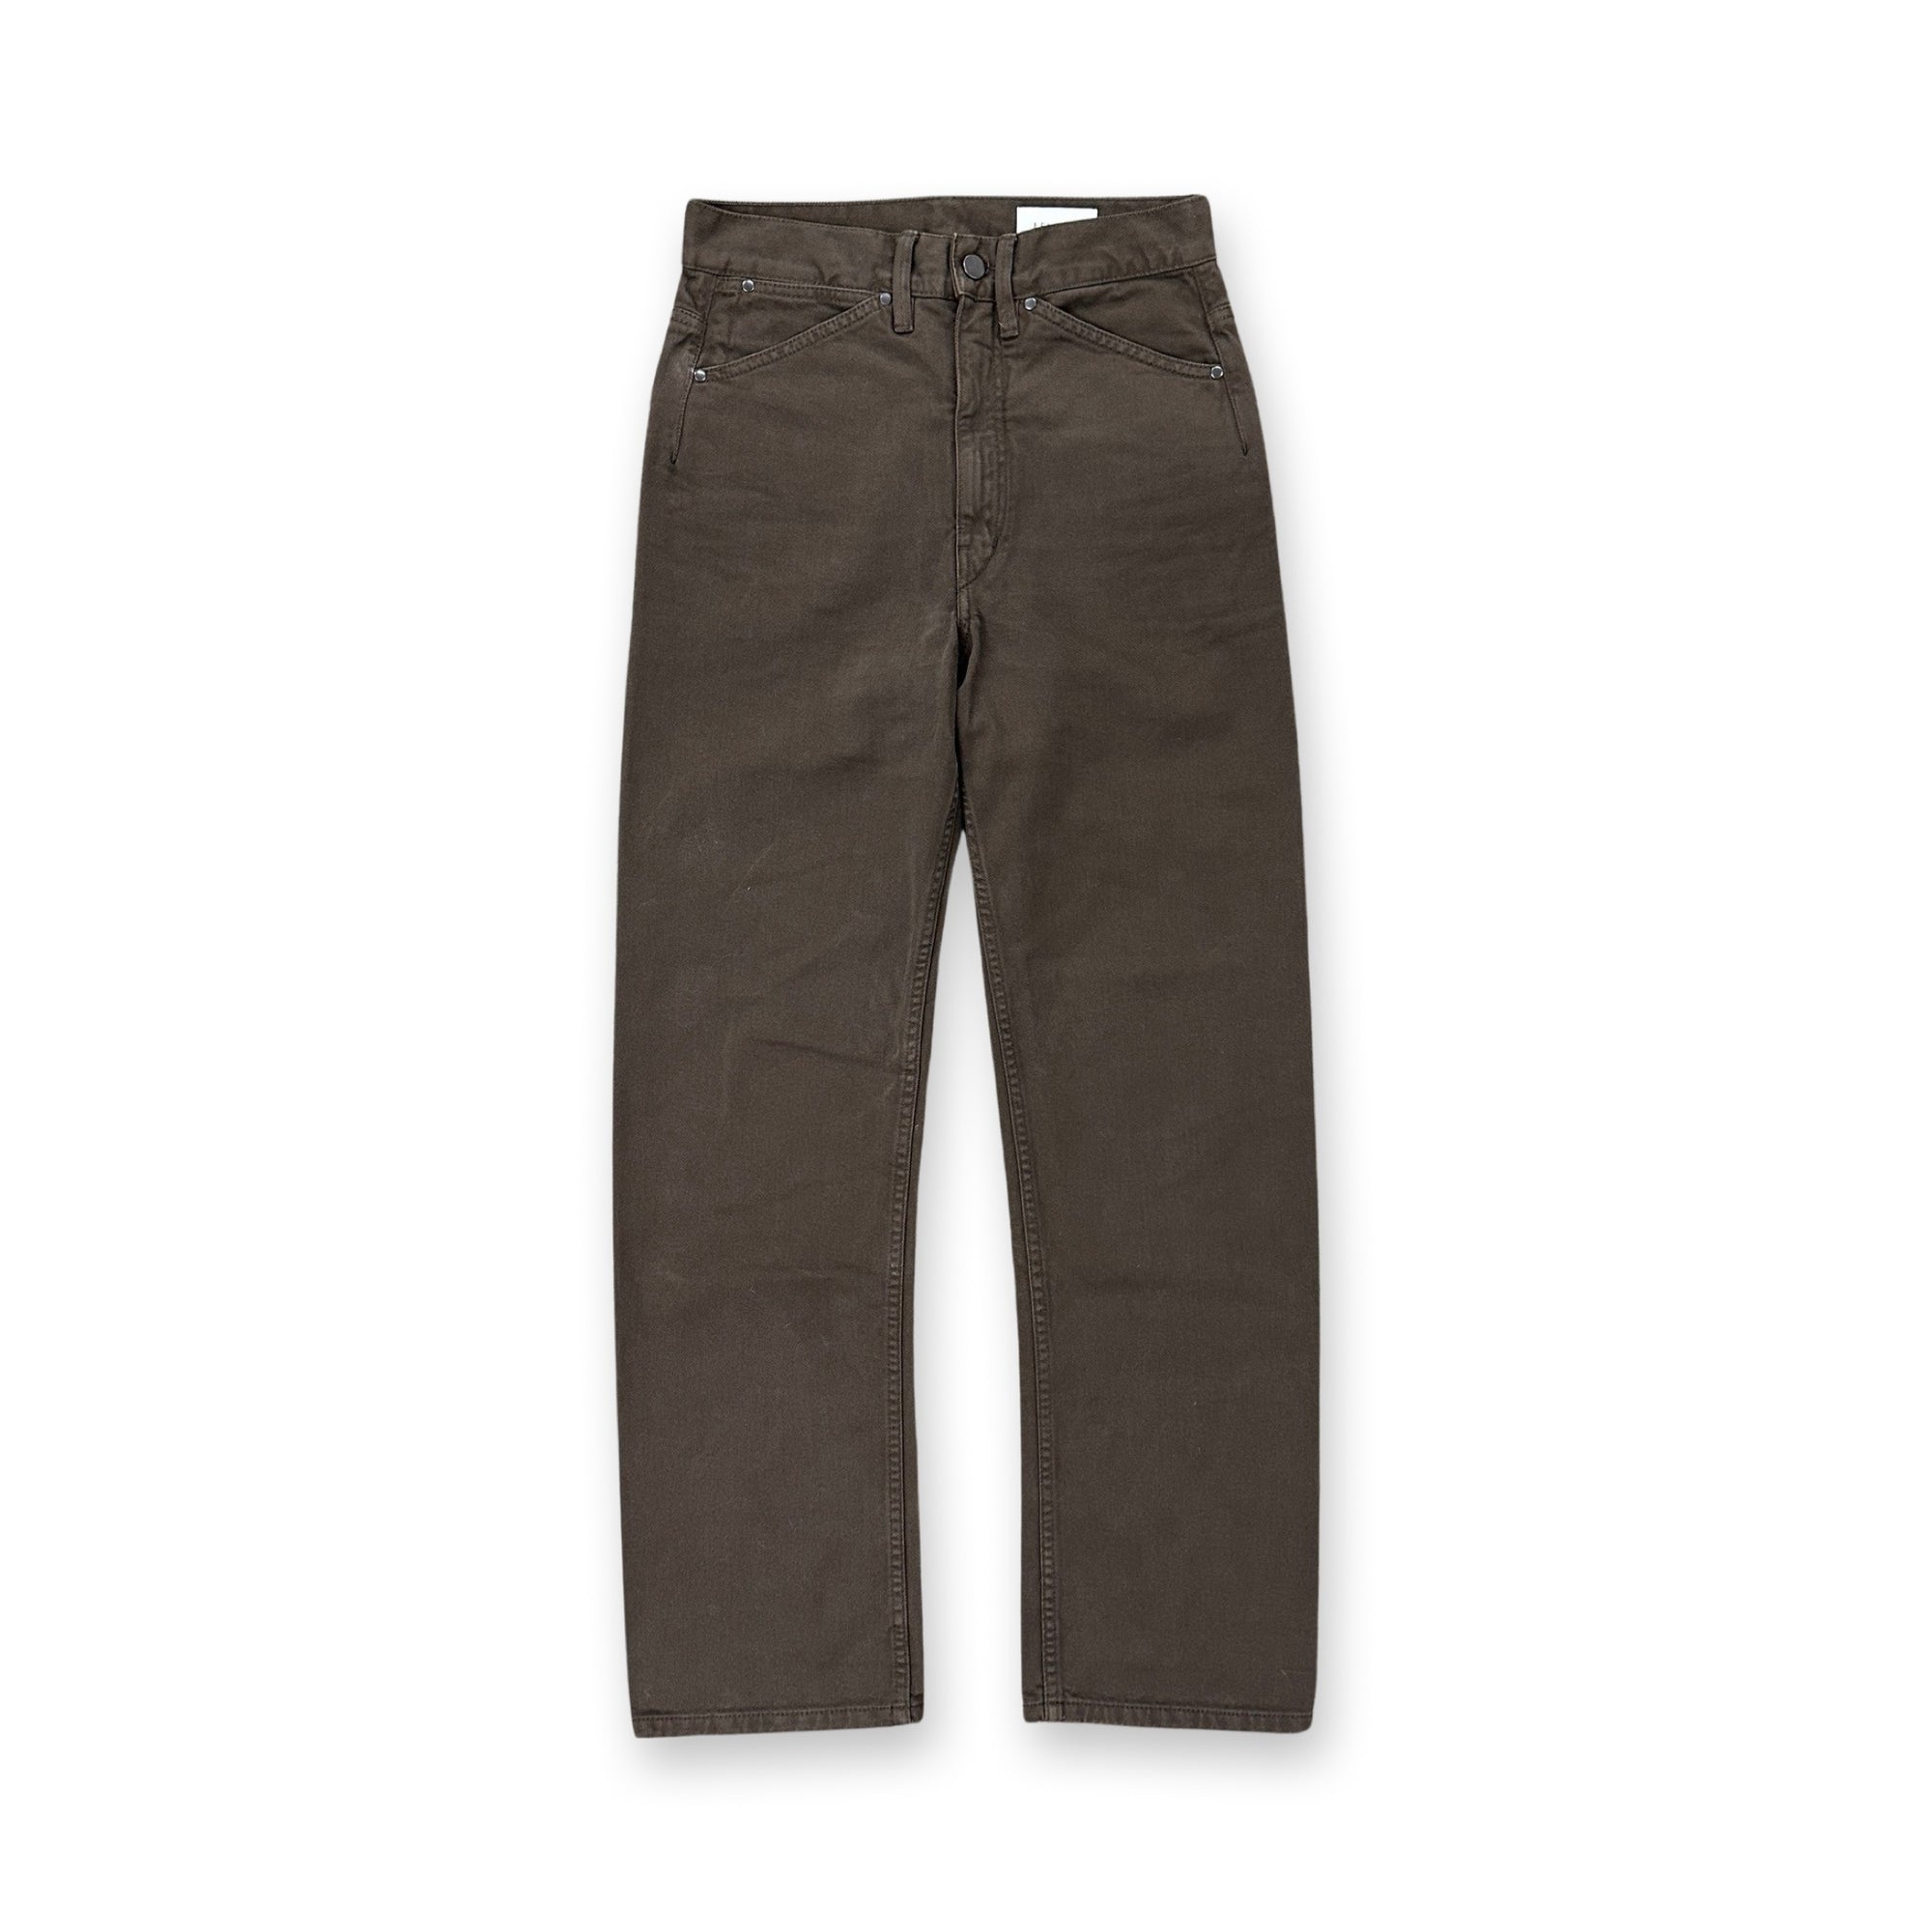 LEMAIRE STRAIGHT LEG JEANS ‘BROWN’ *